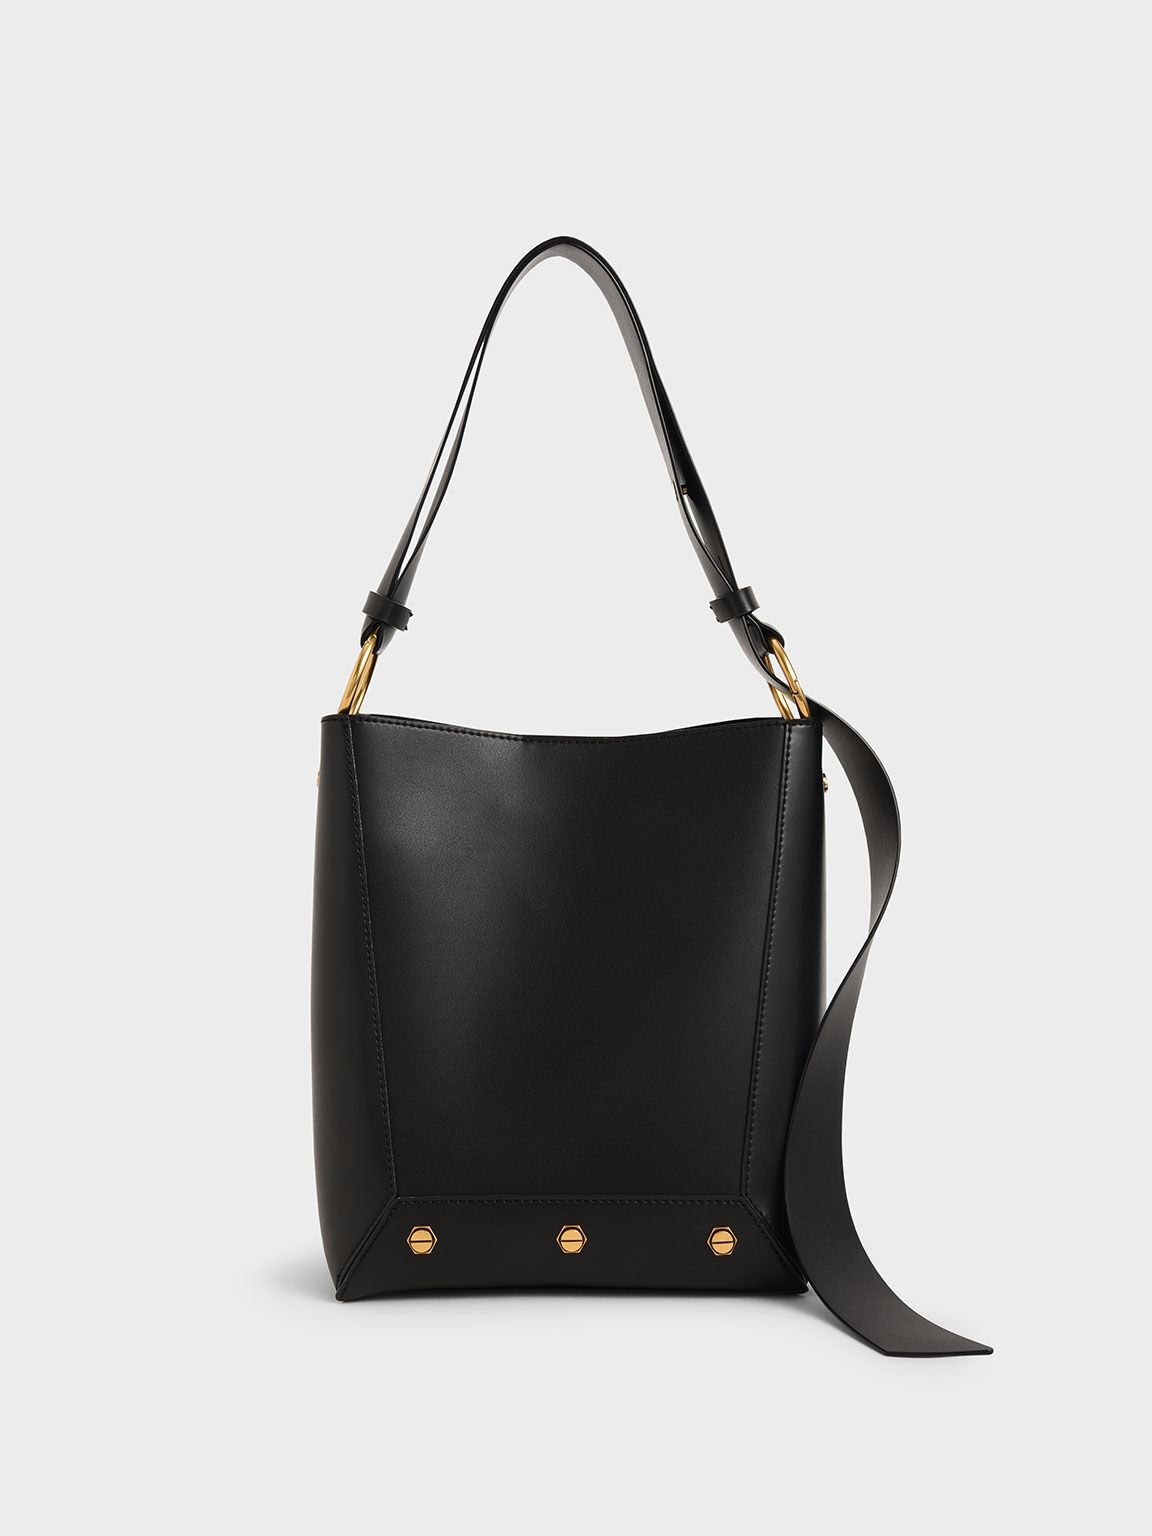 Shop Women's Tote Bags Online | CHARLES & KEITH UK